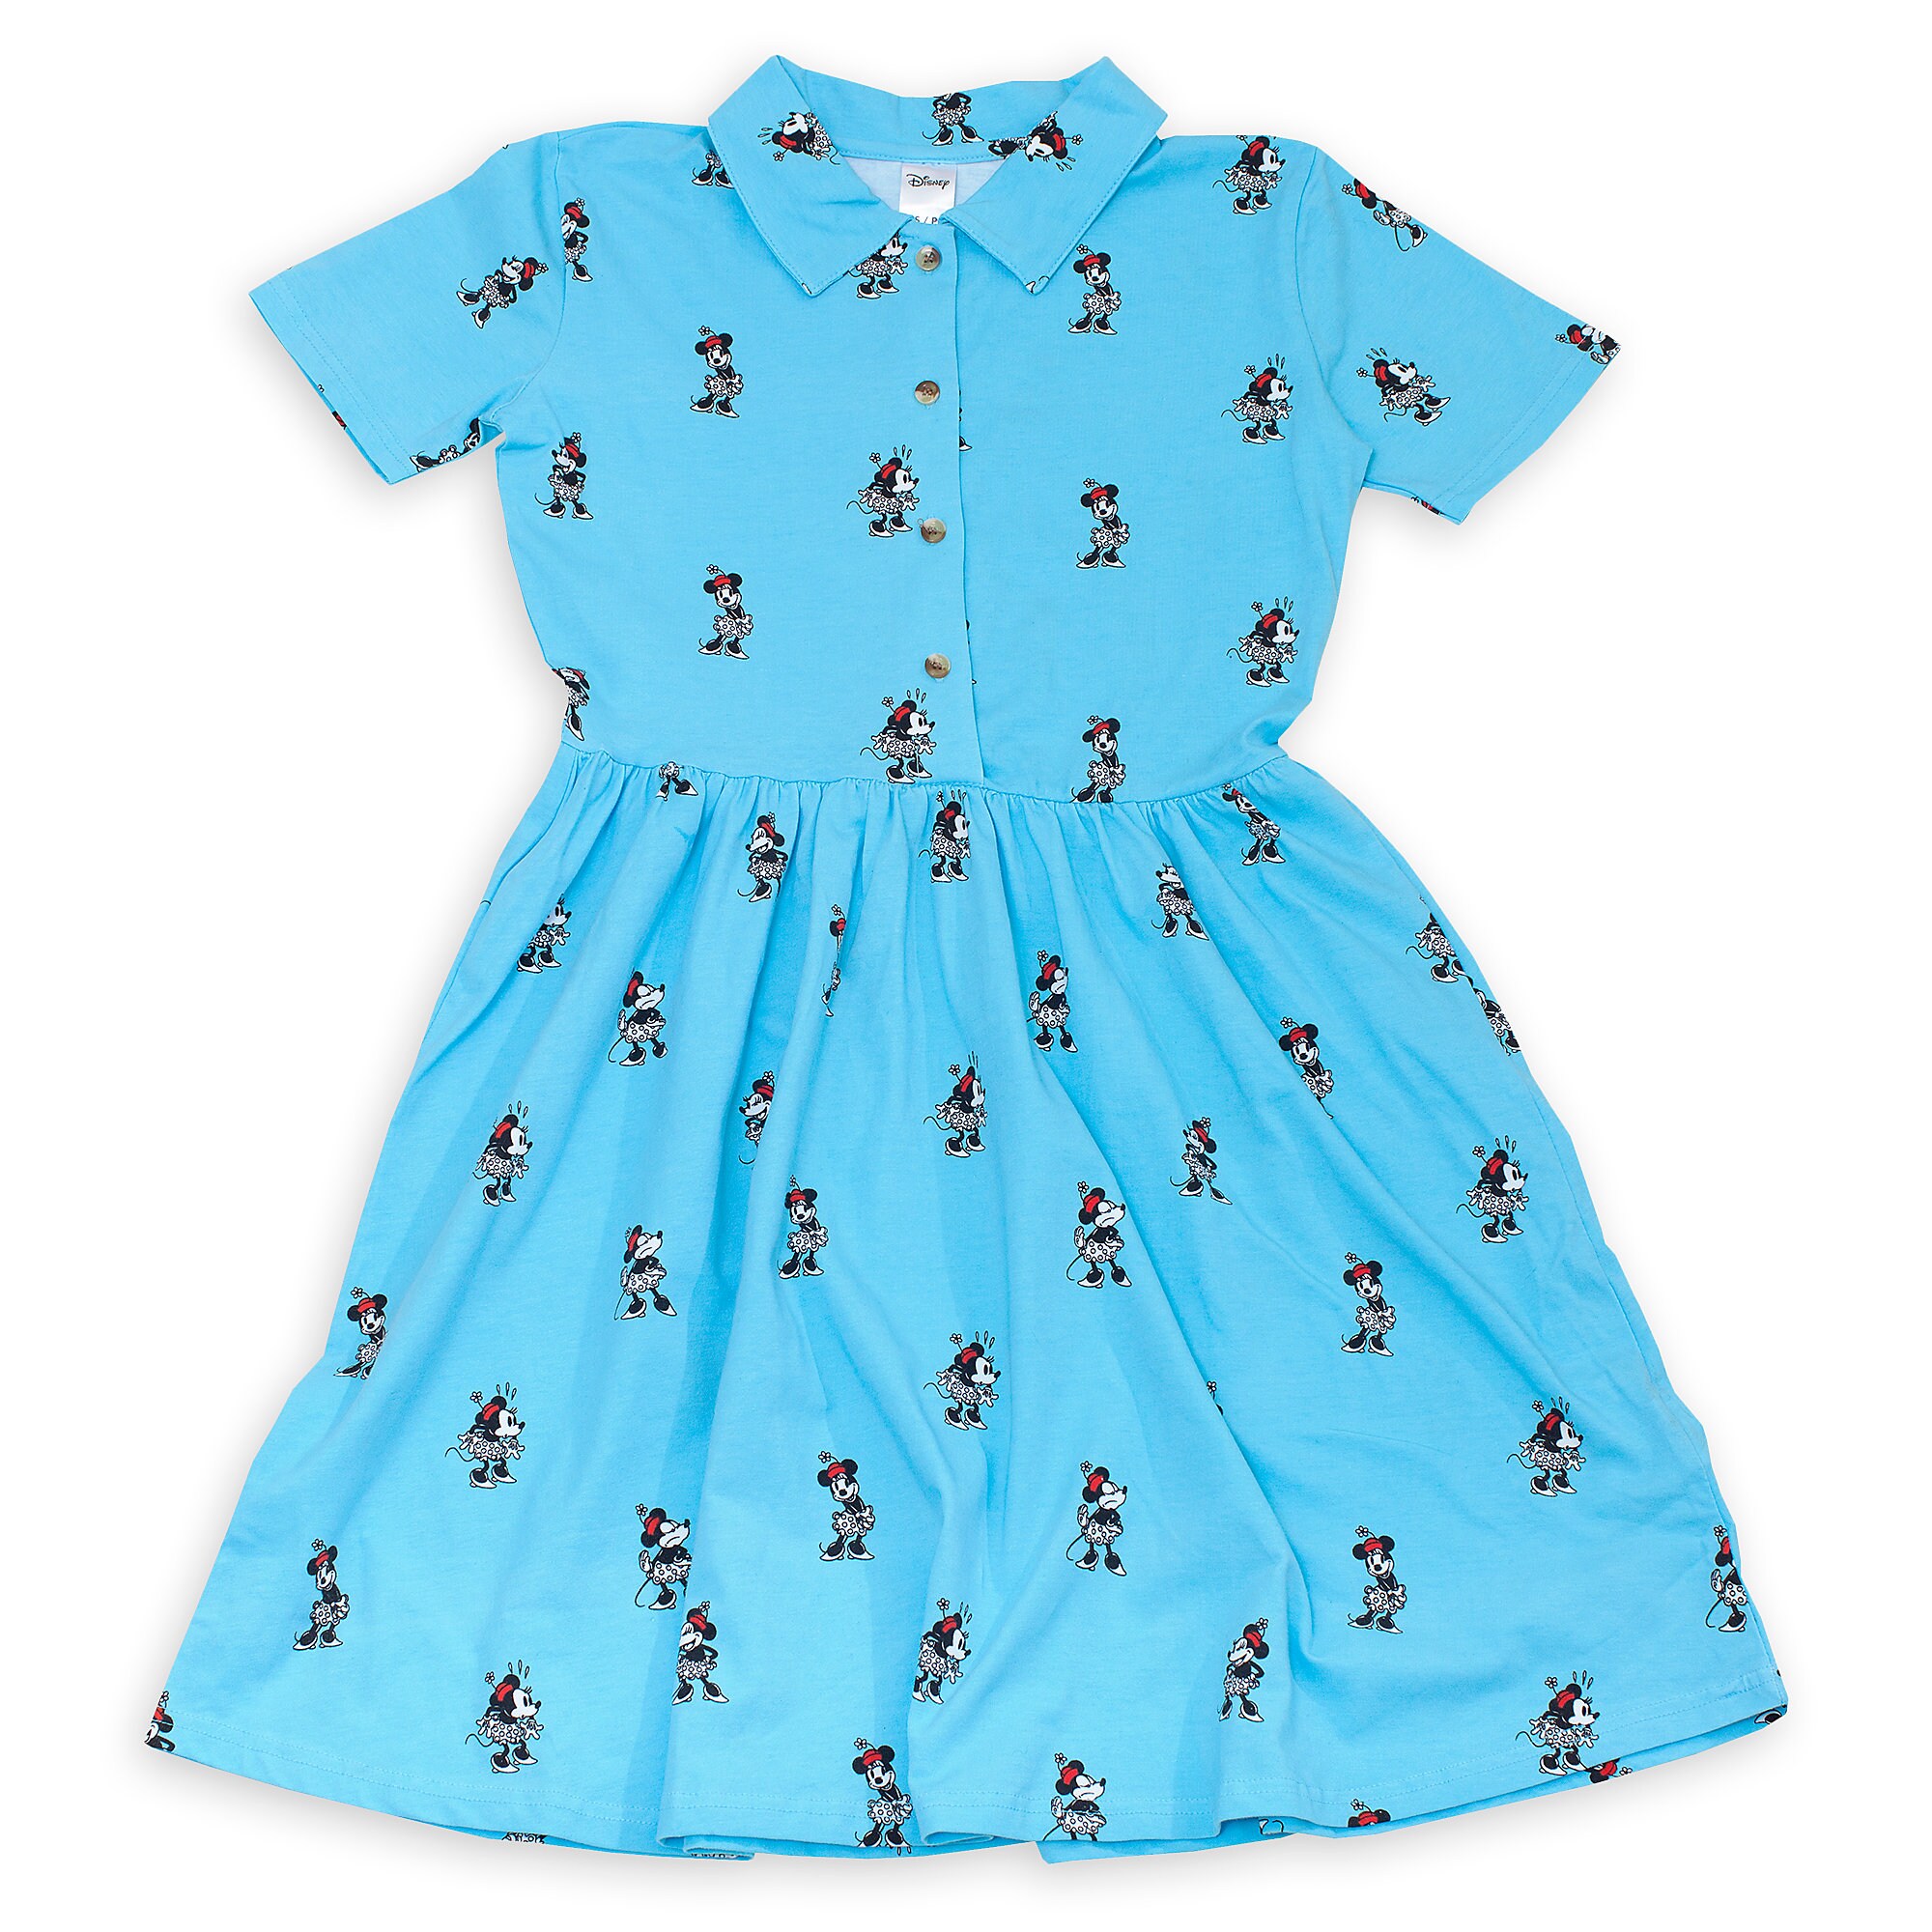 Minnie Mouse Dress for Women by Cakeworthy